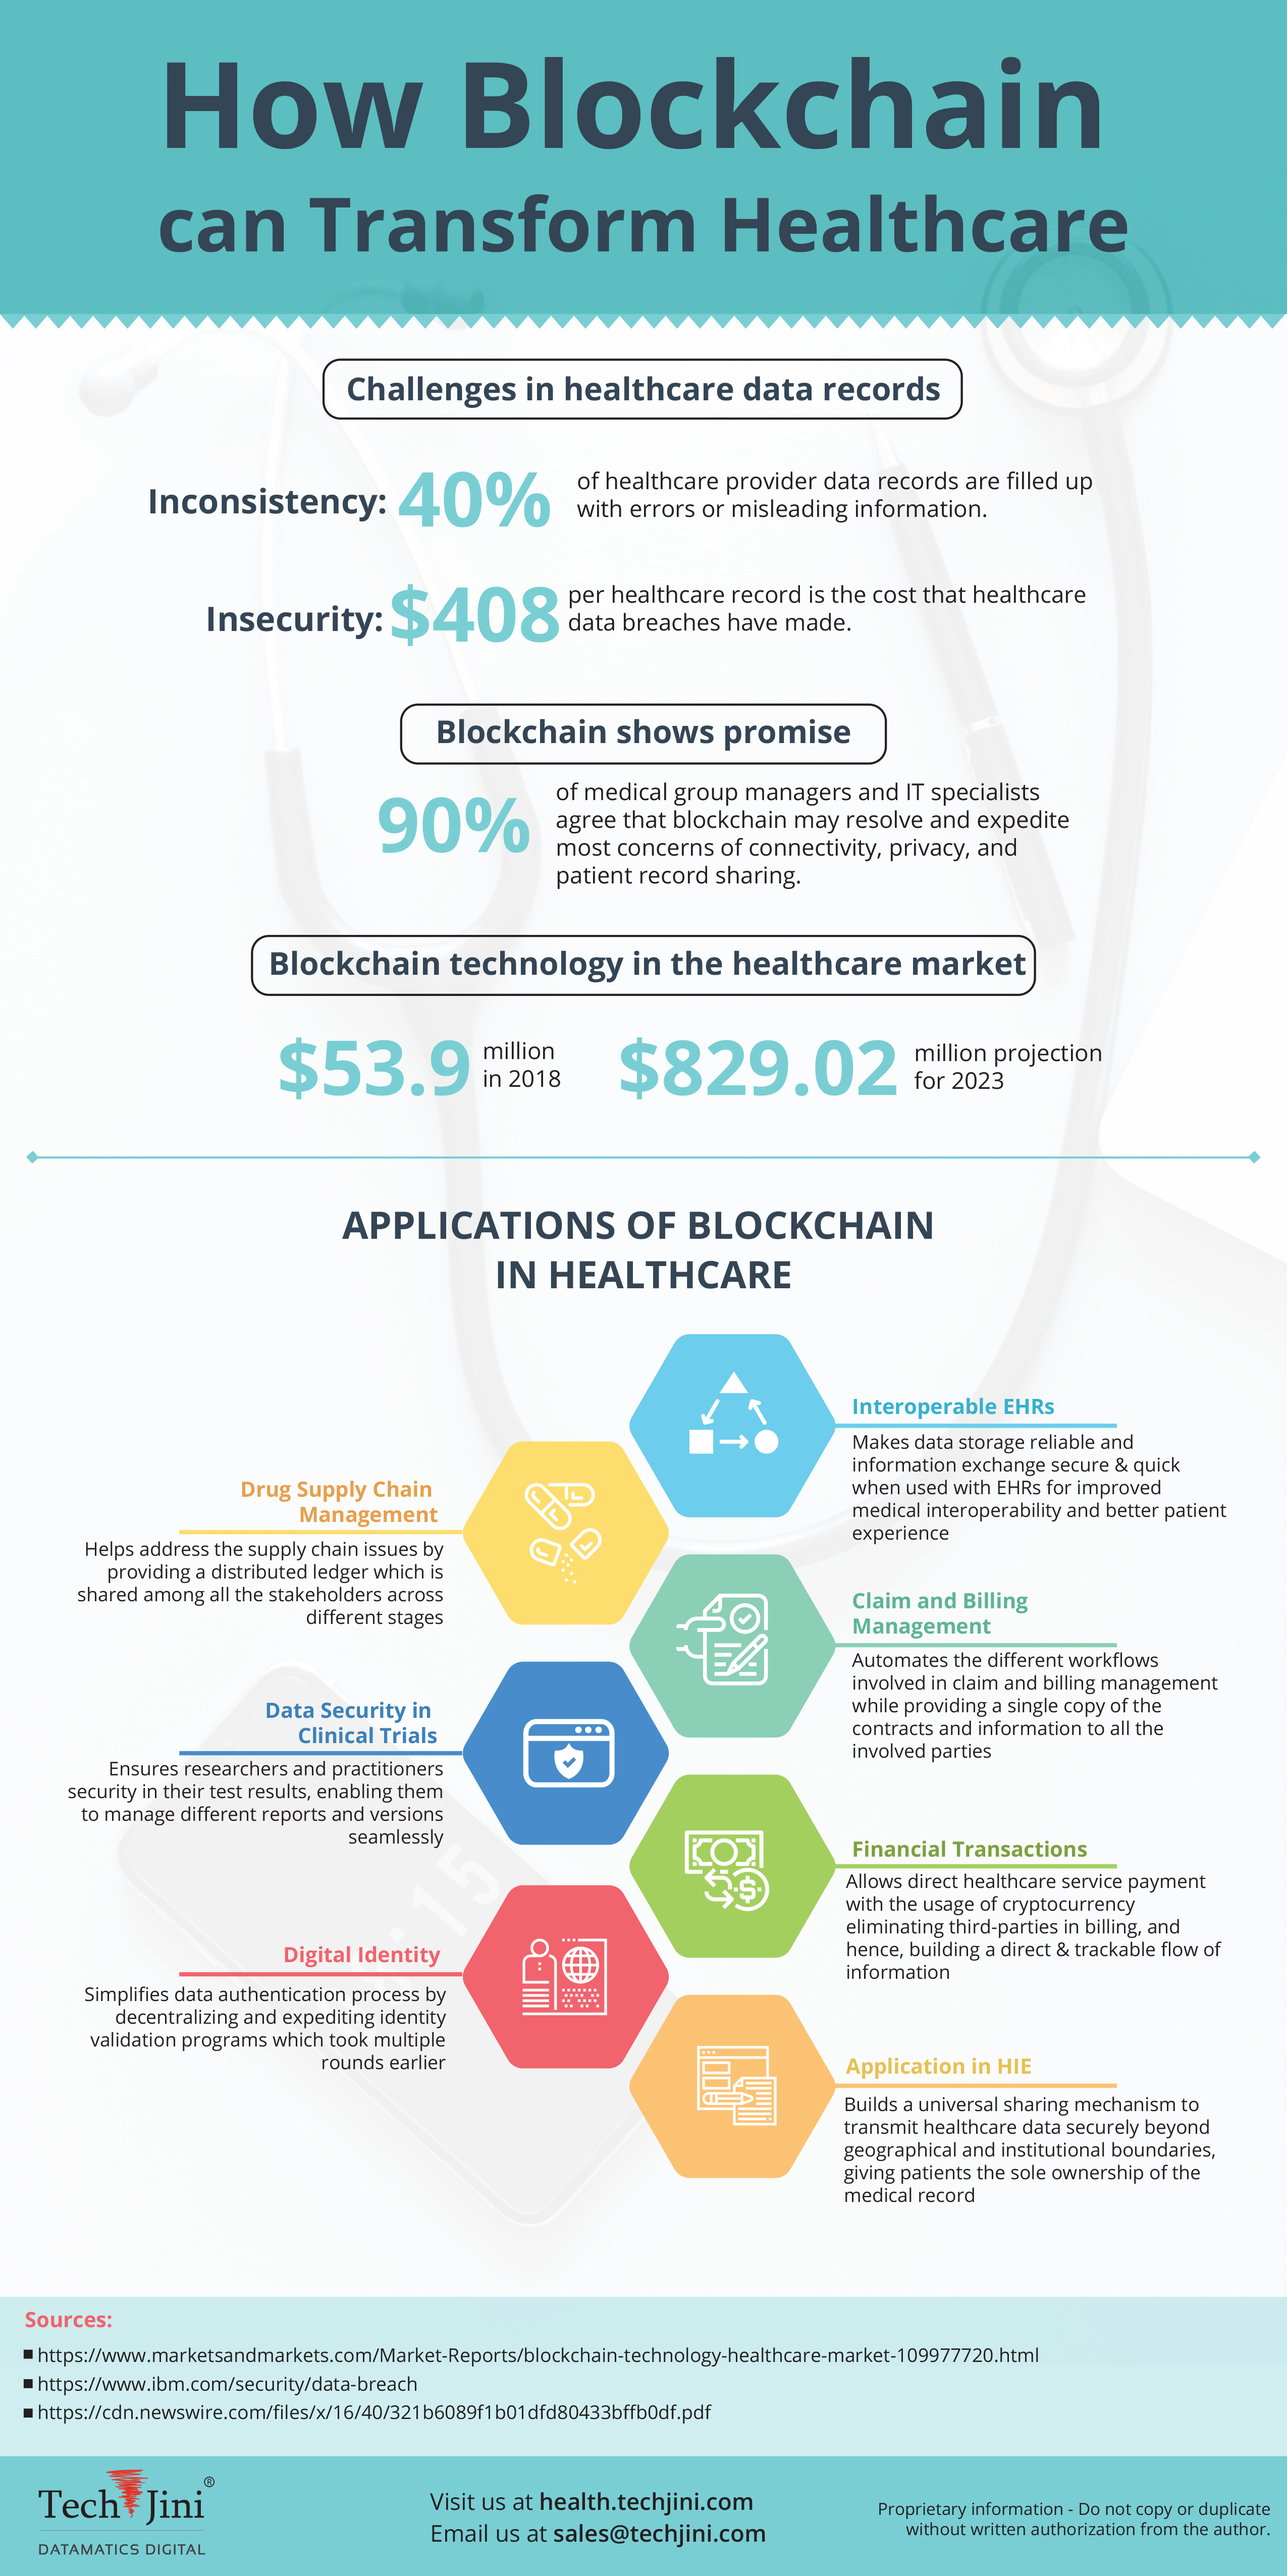 Applications of blockchain in healthcare